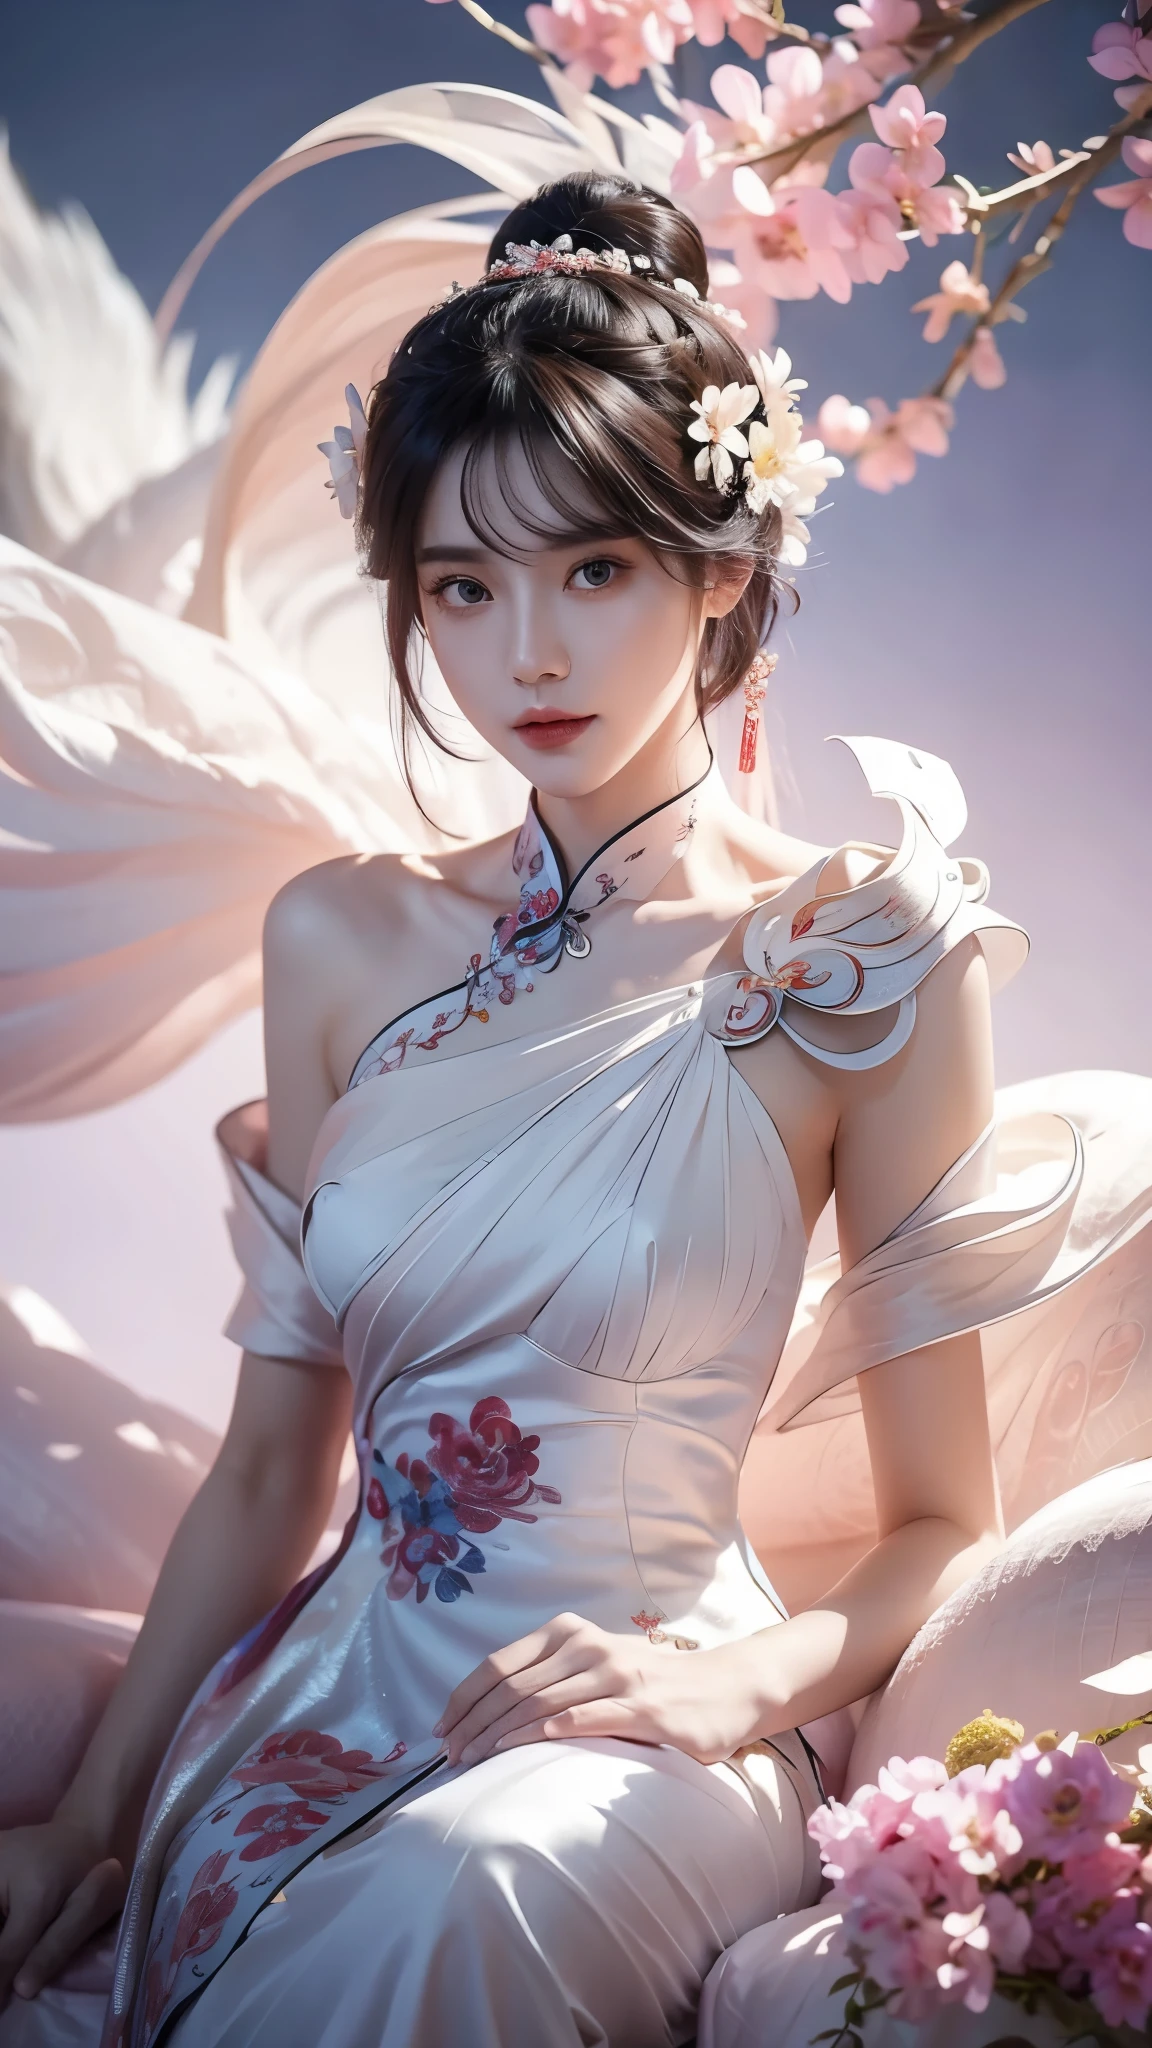 ((Bare shoulder)),Full body shot of woman with flowers in hair, Portraits inspired by Du Qiong, CG trends, Reality, Gorgeous Chinese model, traditional beauty, Chinese girl, cgstation trends, Popular topics on cgstation, Chinese style, palace ， Cute and delicate face, beautiful girl, A beautiful young woman